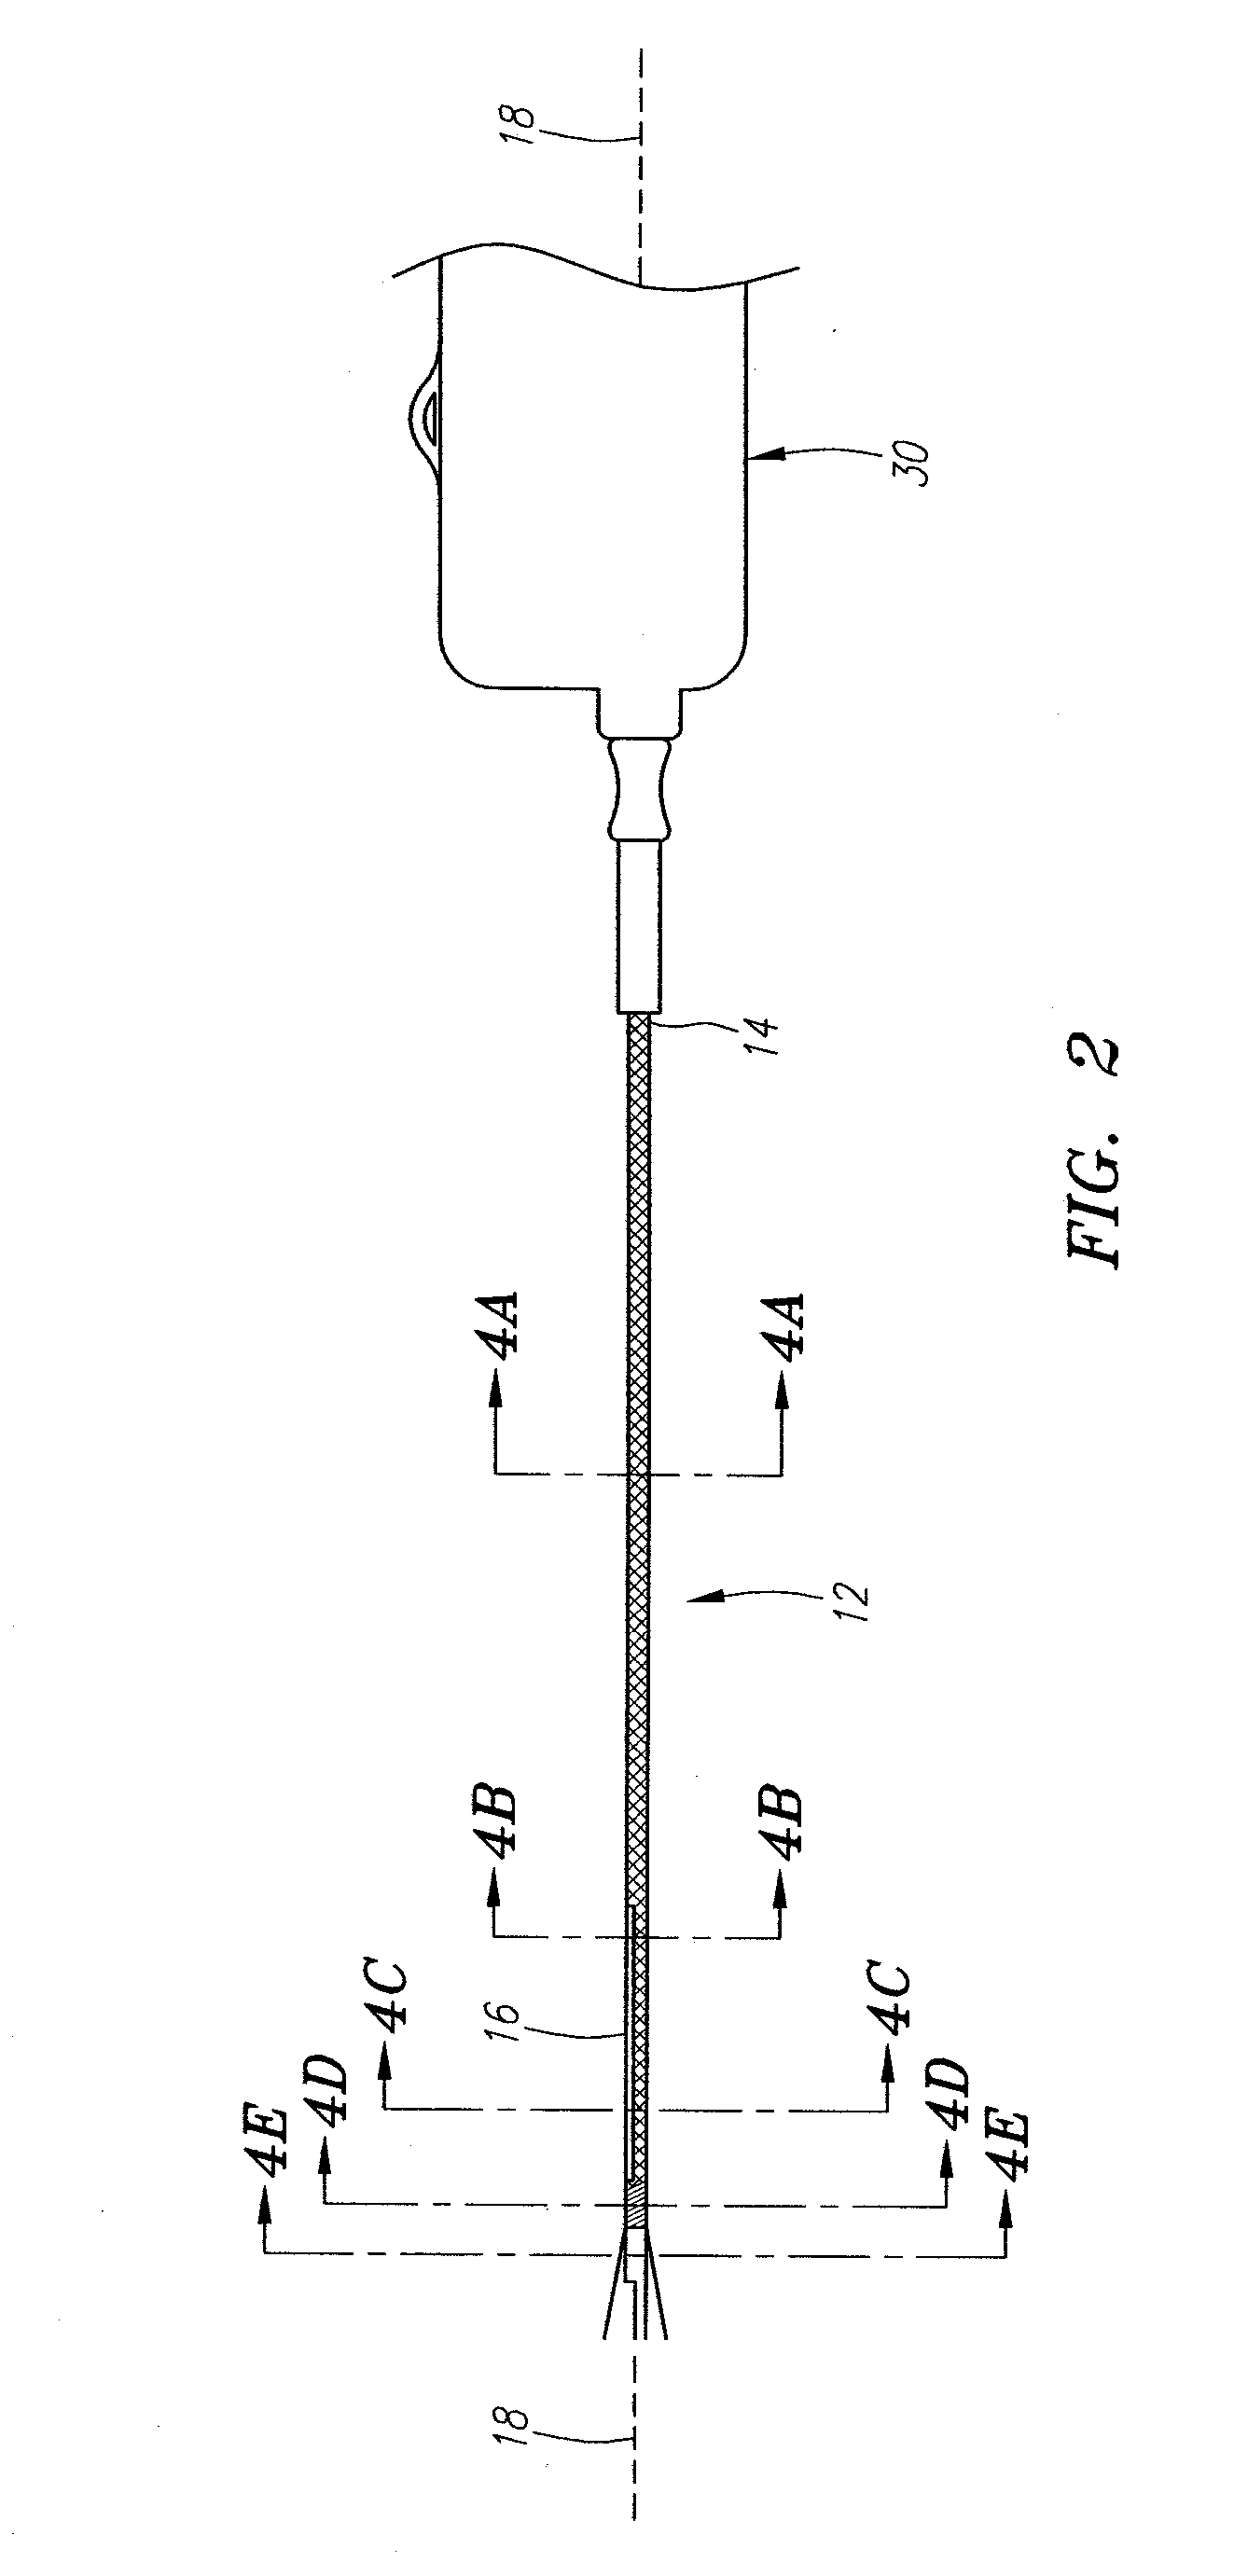 Complex Shaped Steerable Catheters and Methods for Making and Using Them